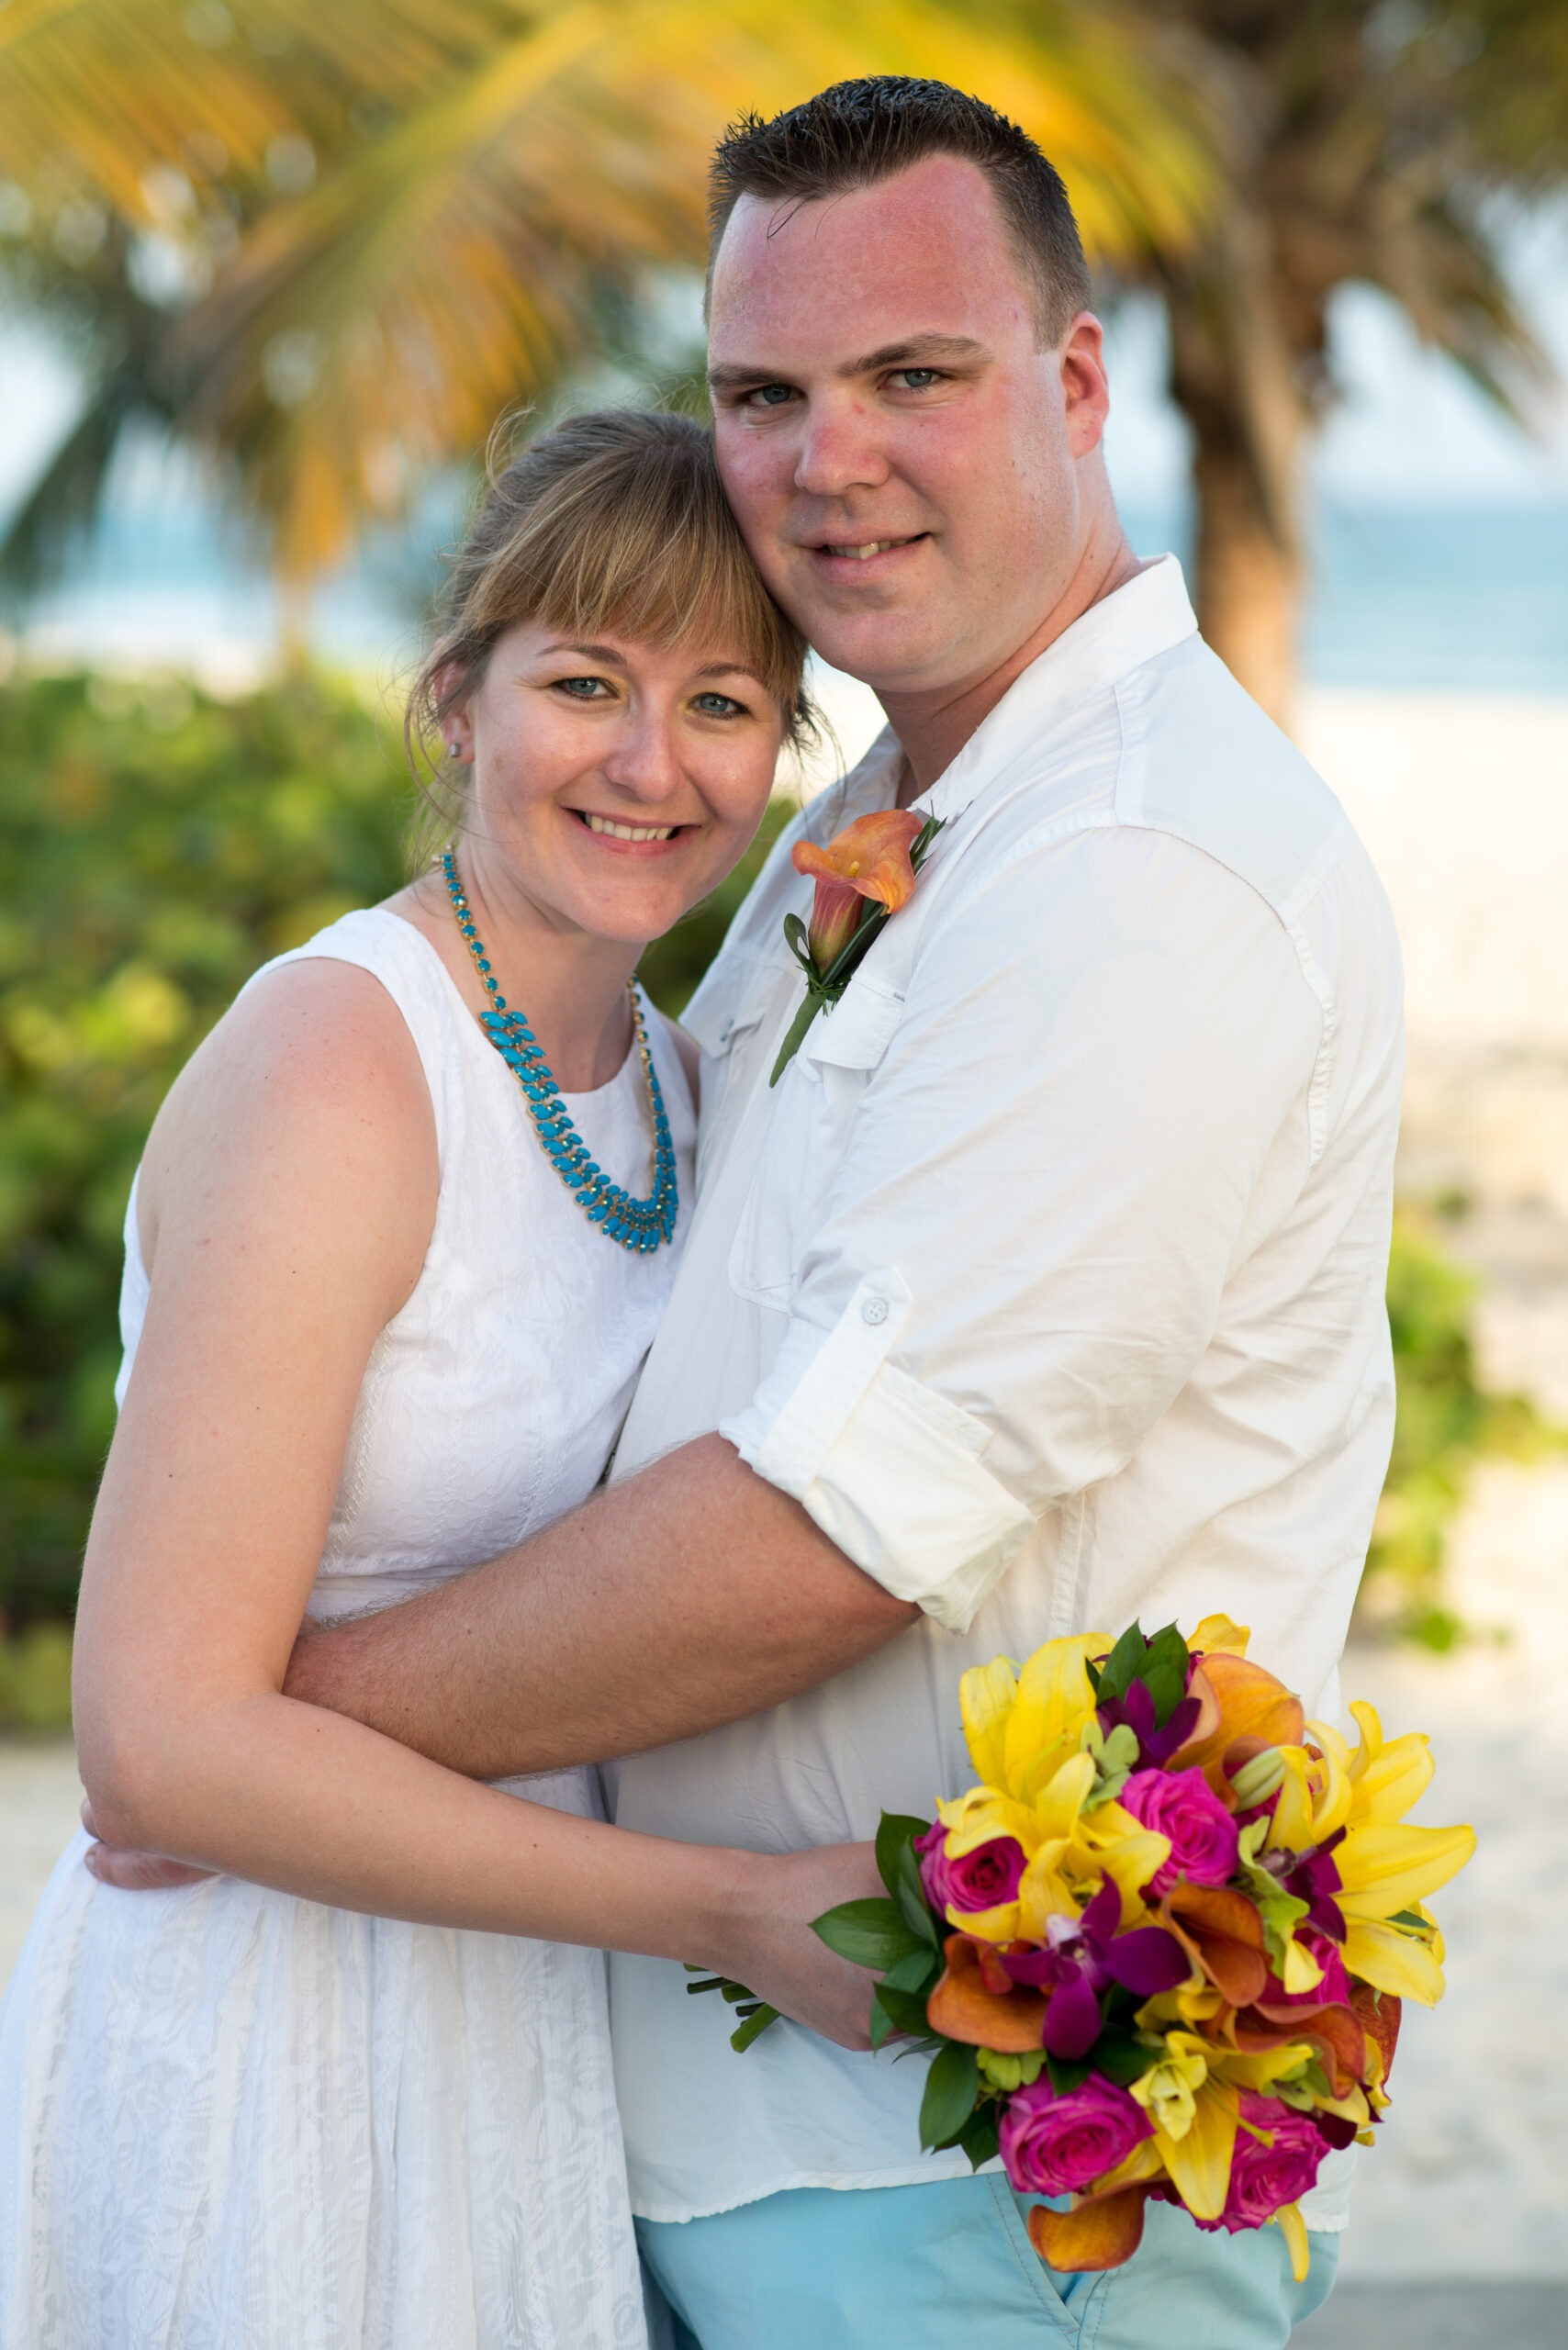 Barbados Destination Wedding Planners | Caribbean Event Planners | CWC Events